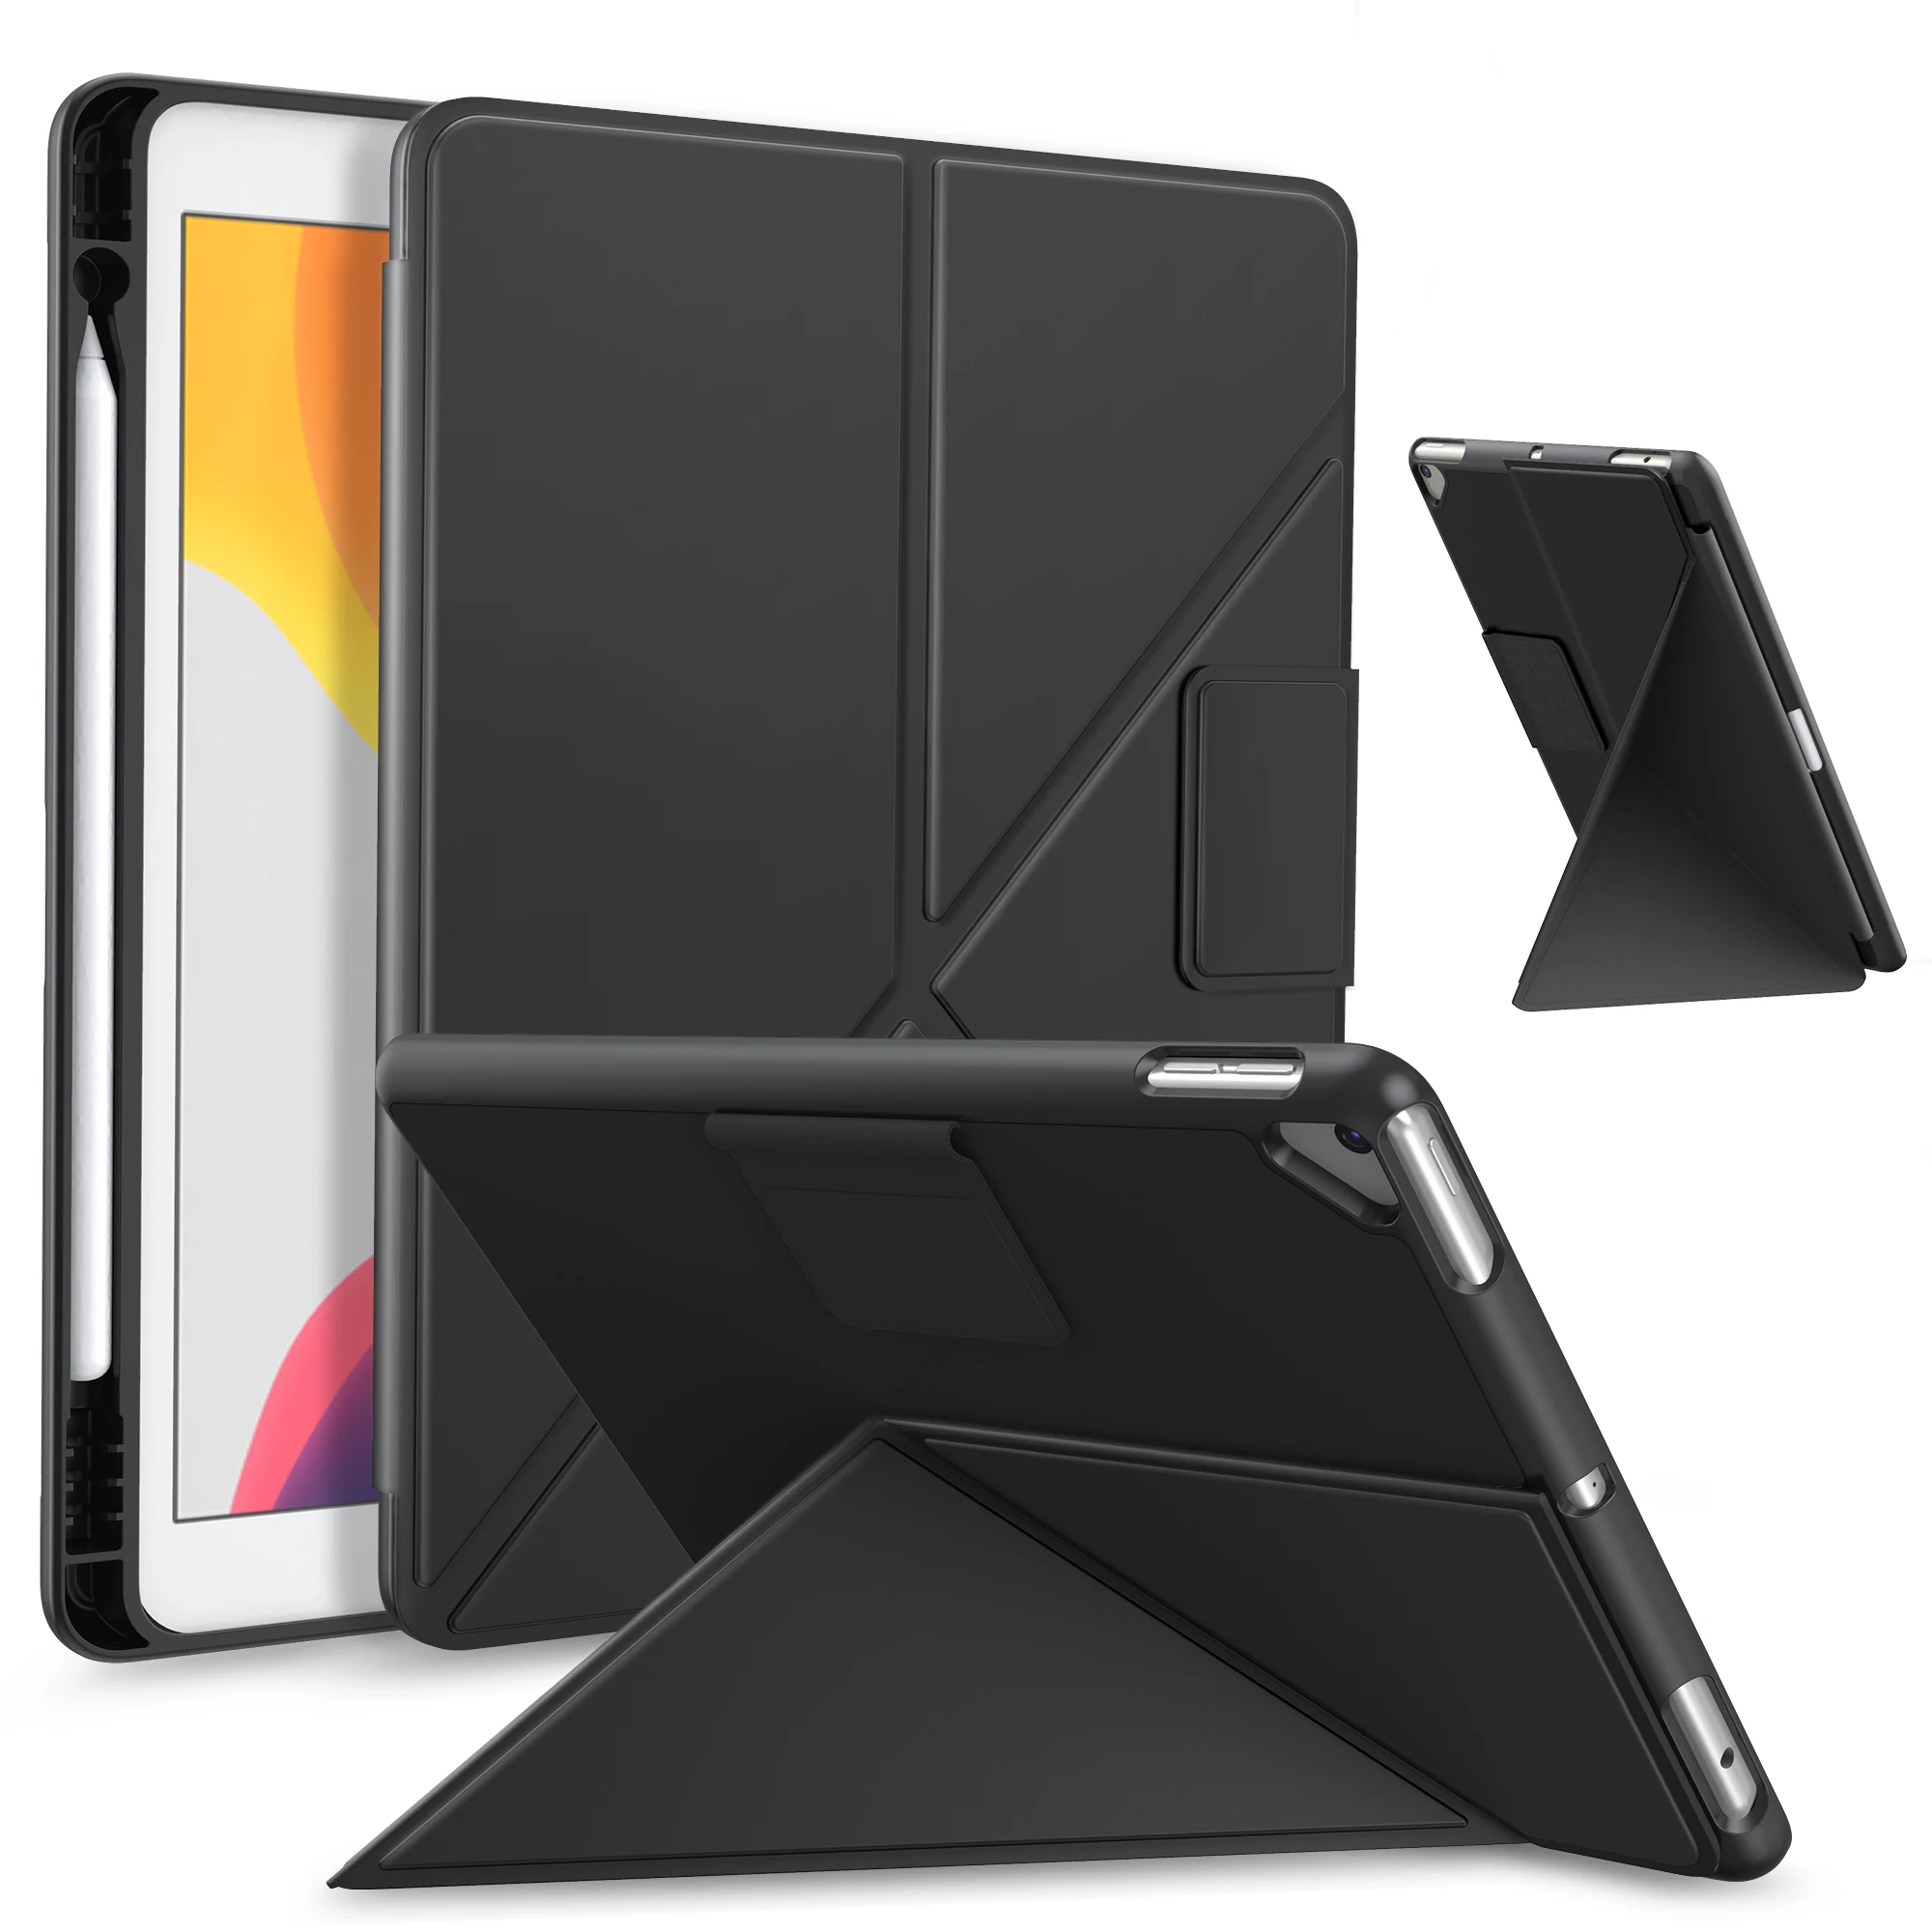 Case for iPad 8th Generation/iPad 7th Gen 10.2-inch/Air 3 10.5 ,Origami Standing Shell Case,Multi Angle Magnetic TPU Back Cover